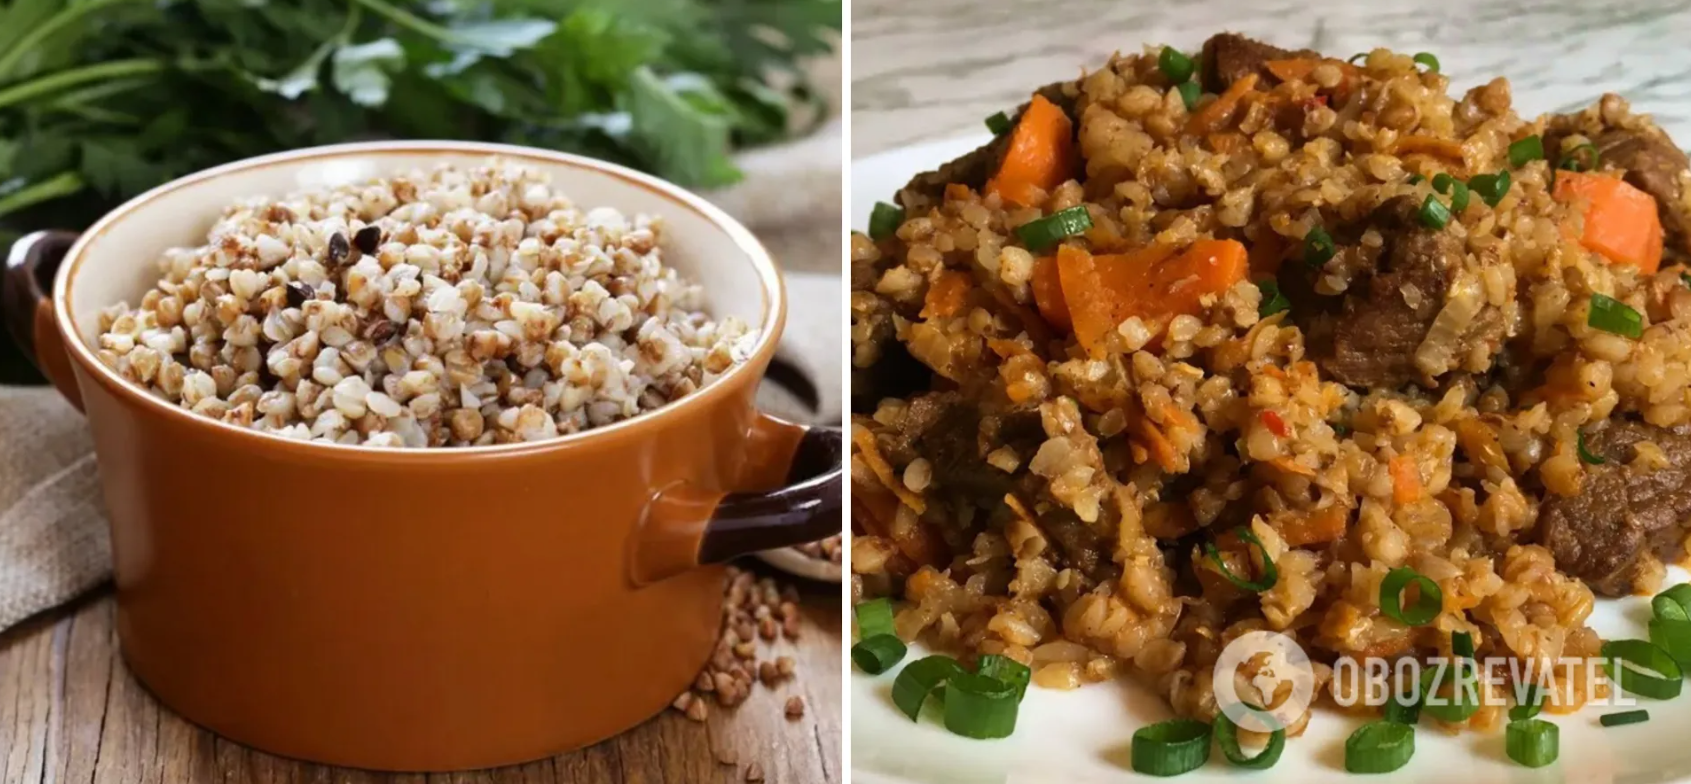 How to cook buckwheat tasty and properly